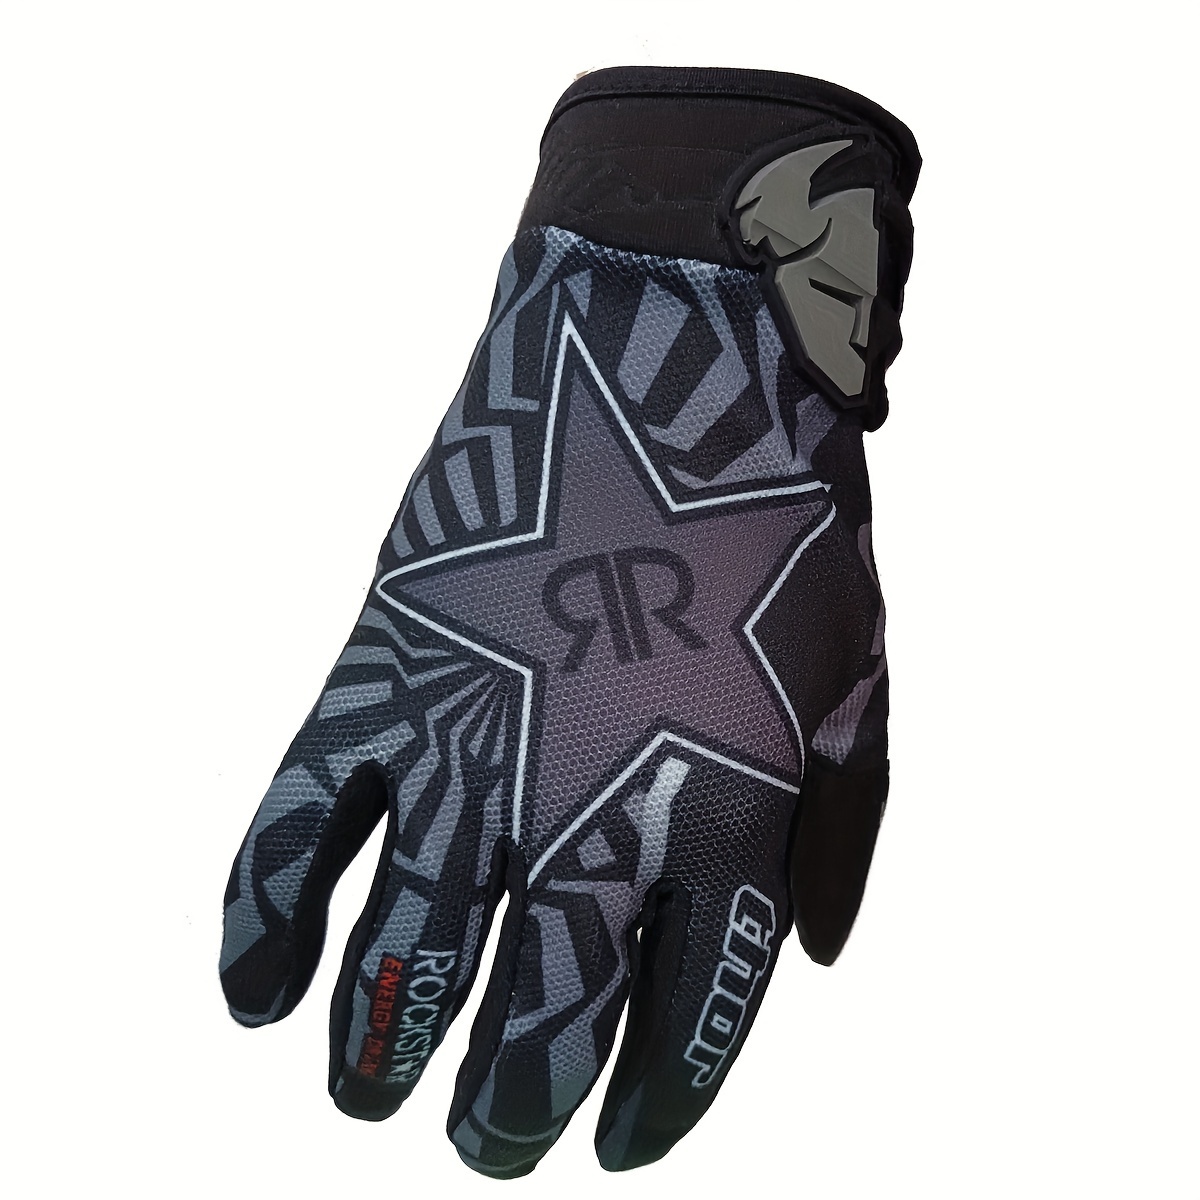 

Men's Stylish Full-finger Motorcycle Gloves - Windproof & Durable With Hook-and-loop Fastener Closure For Outdoor Riding